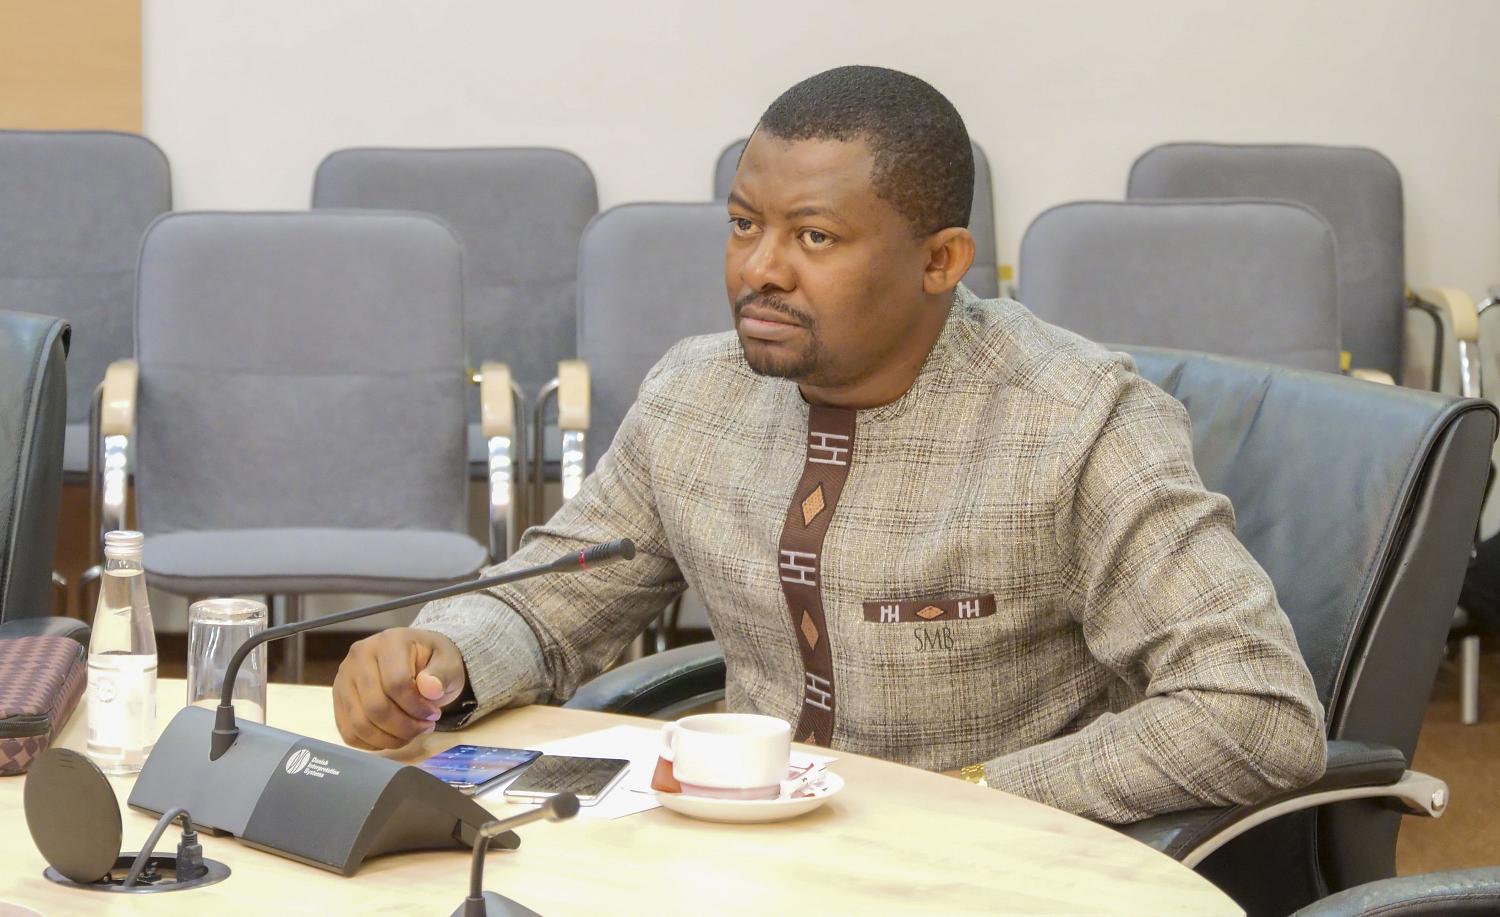 The delegation of the Central African Republic visited MССI